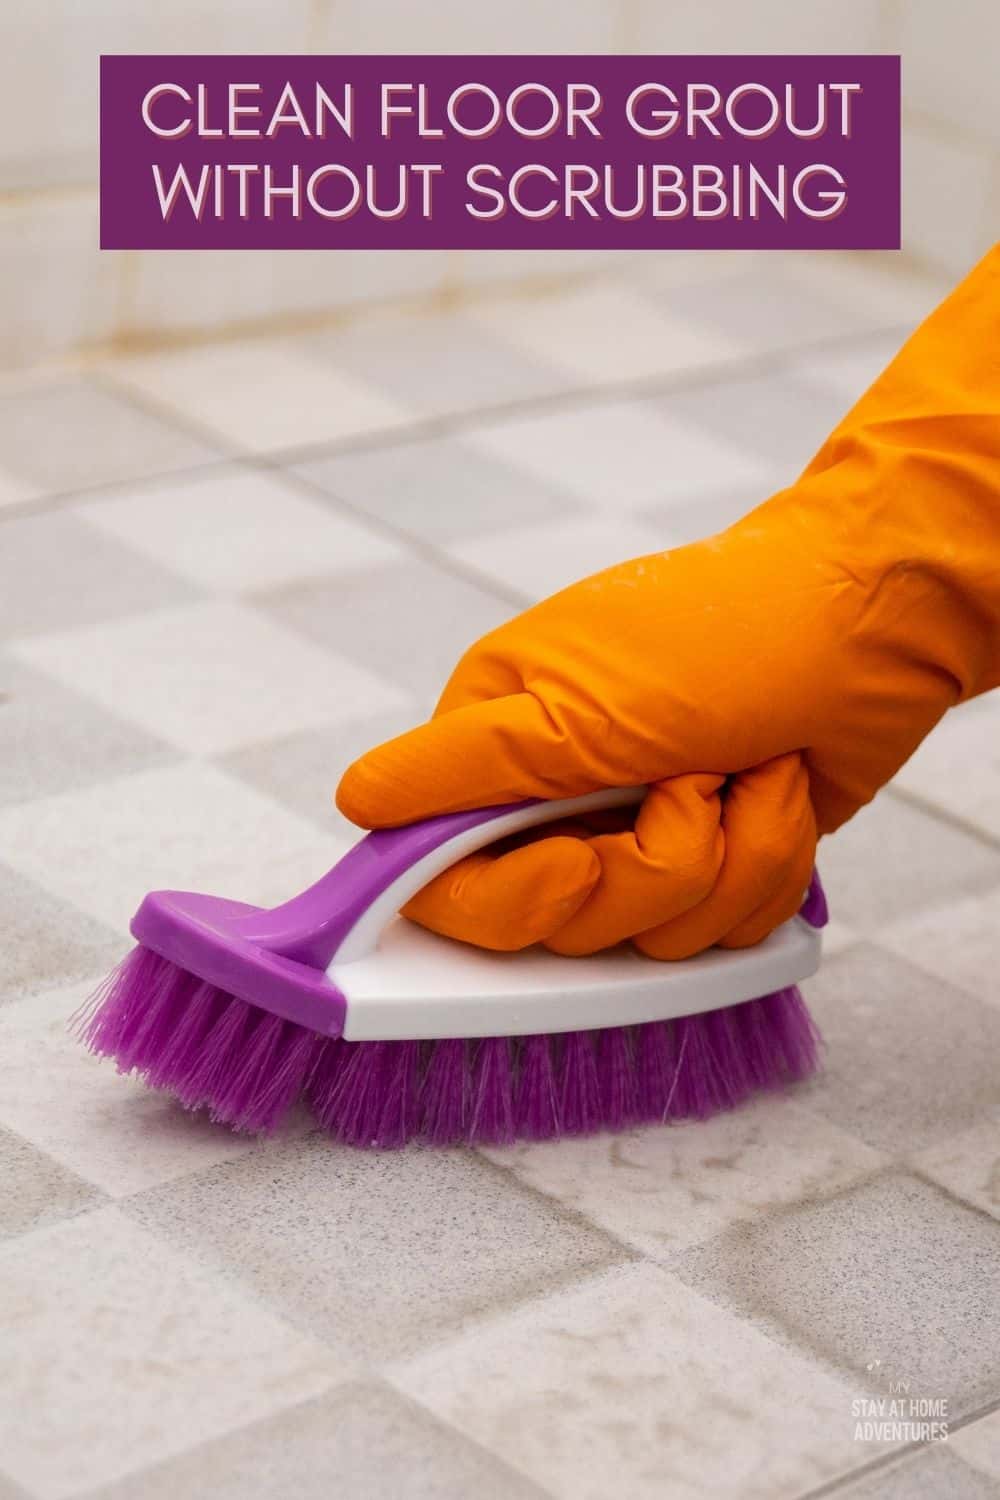 The truth is that you don’t have to scrub the floor grout. There’s a straightforward trick that can make it so easy to clean floor grout. Let's take a closer look at getting sparkling clean floor grout without scrubbing. via @mystayathome